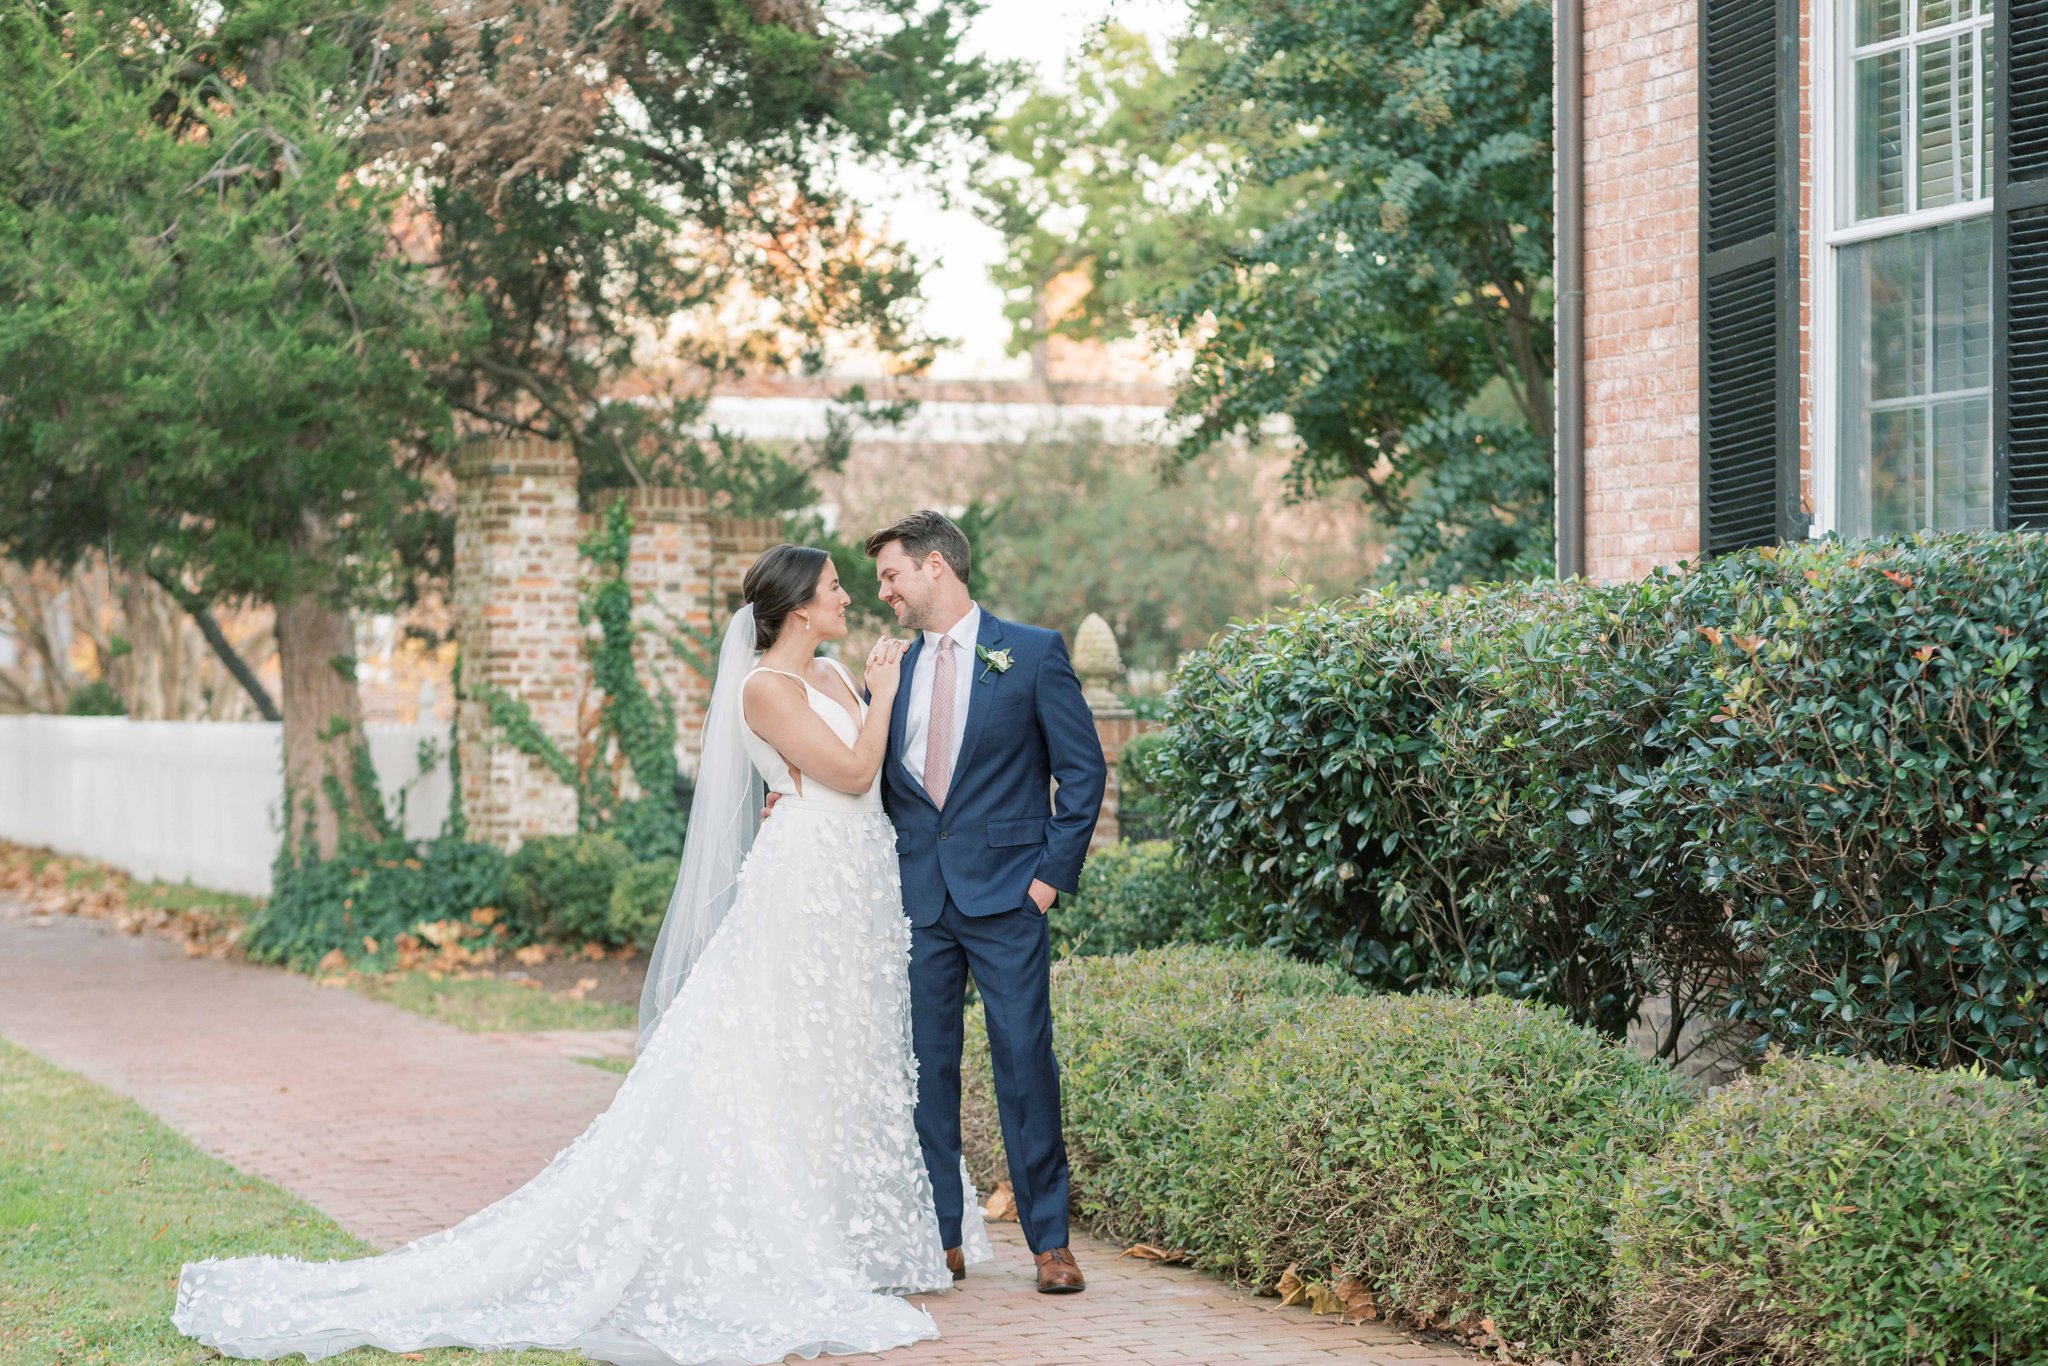 A romantic fall wedding at the Tidewater Inn in Easton, MD.